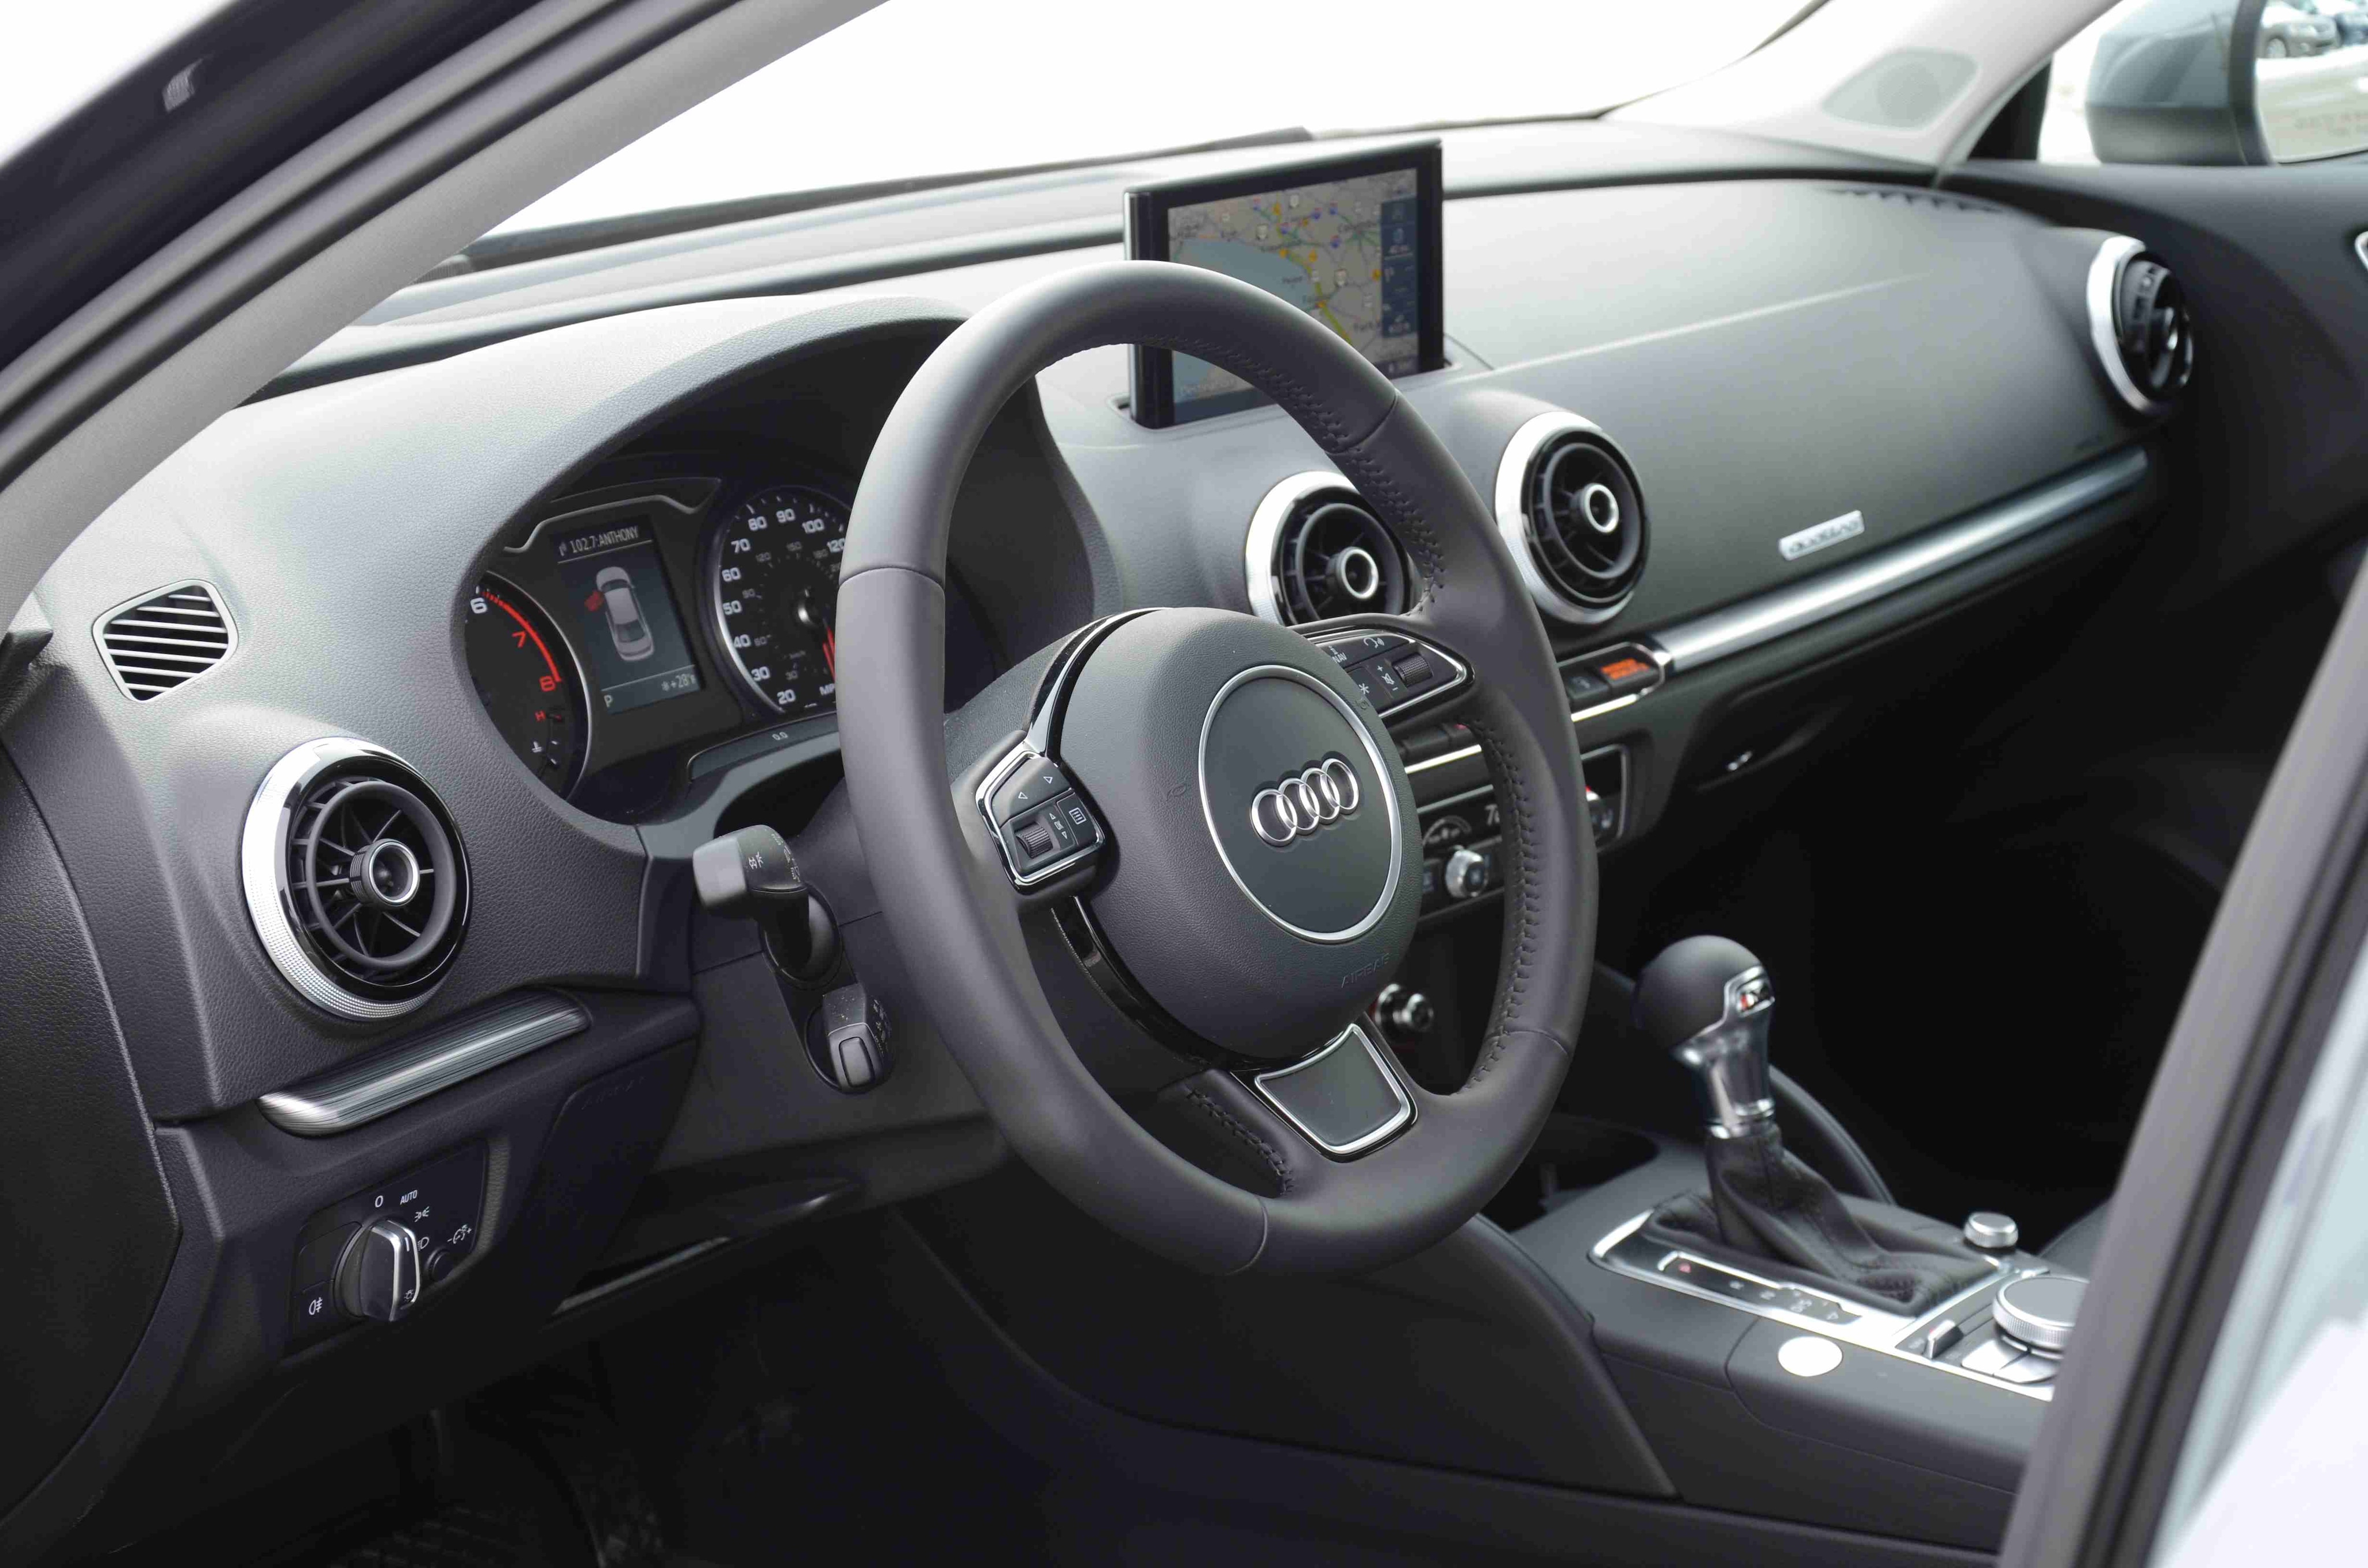 Audi A3 Cabriolet Interior | Top HD Images For Free